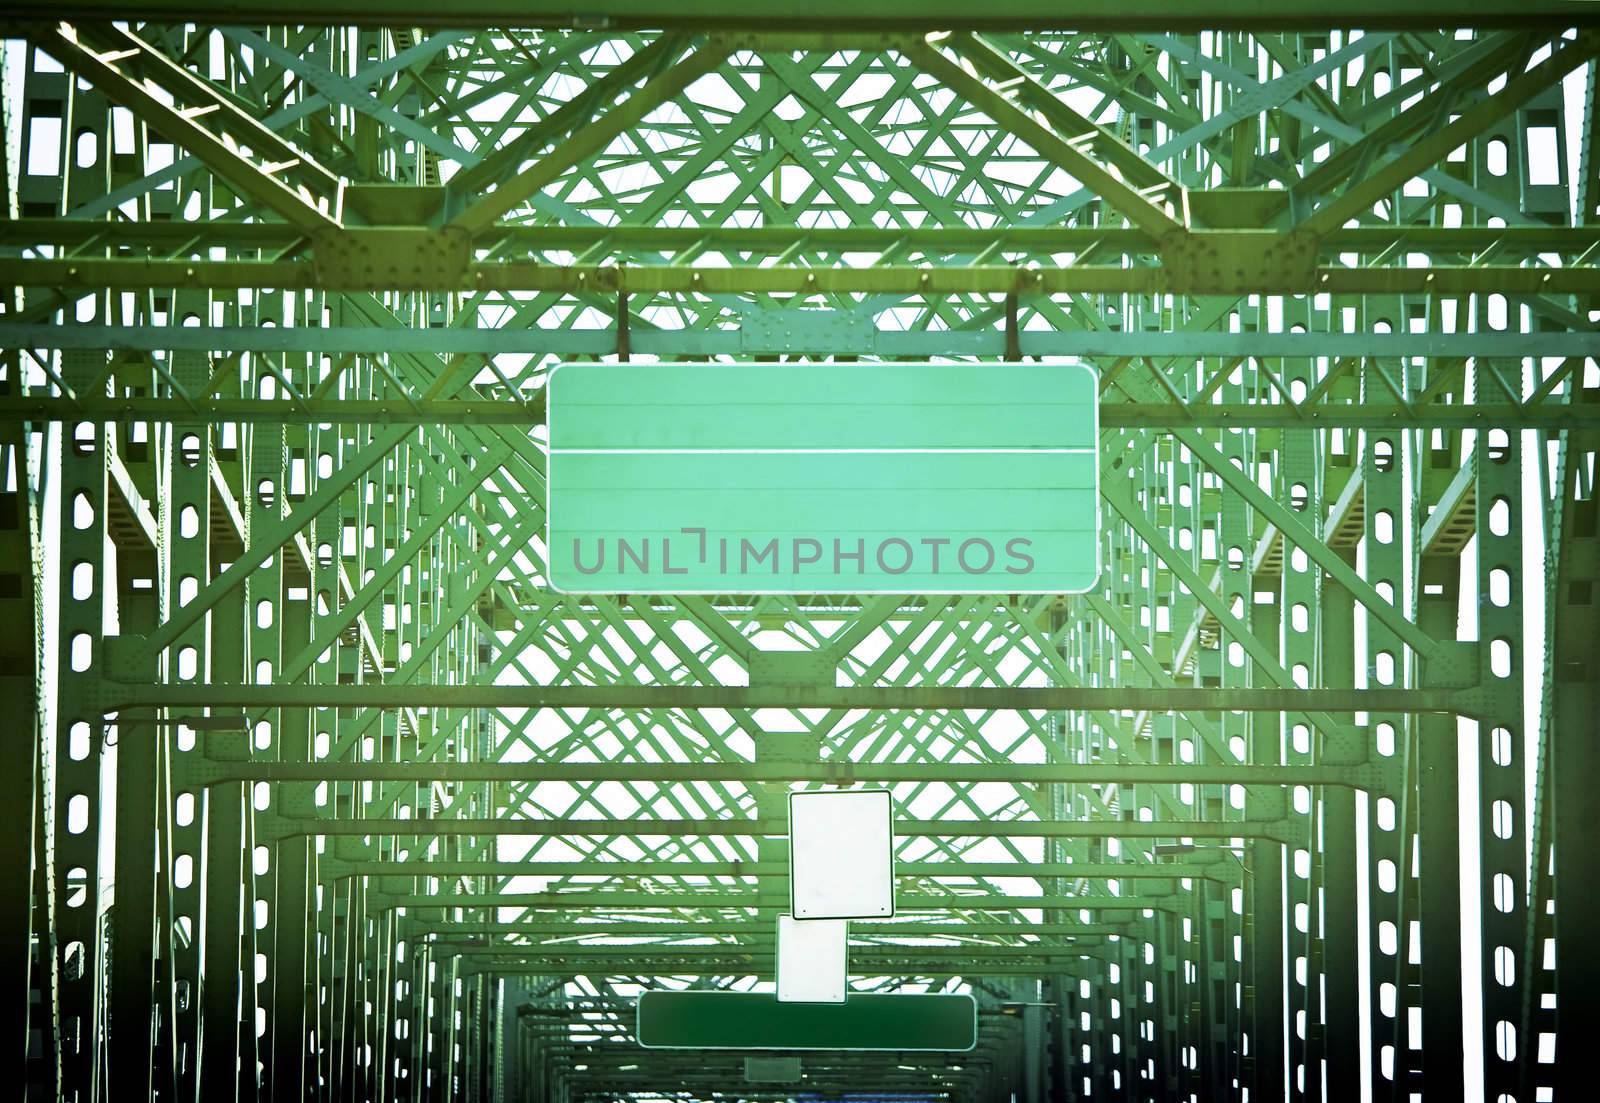 Blank Green road sign on green bridge in abstract patterns